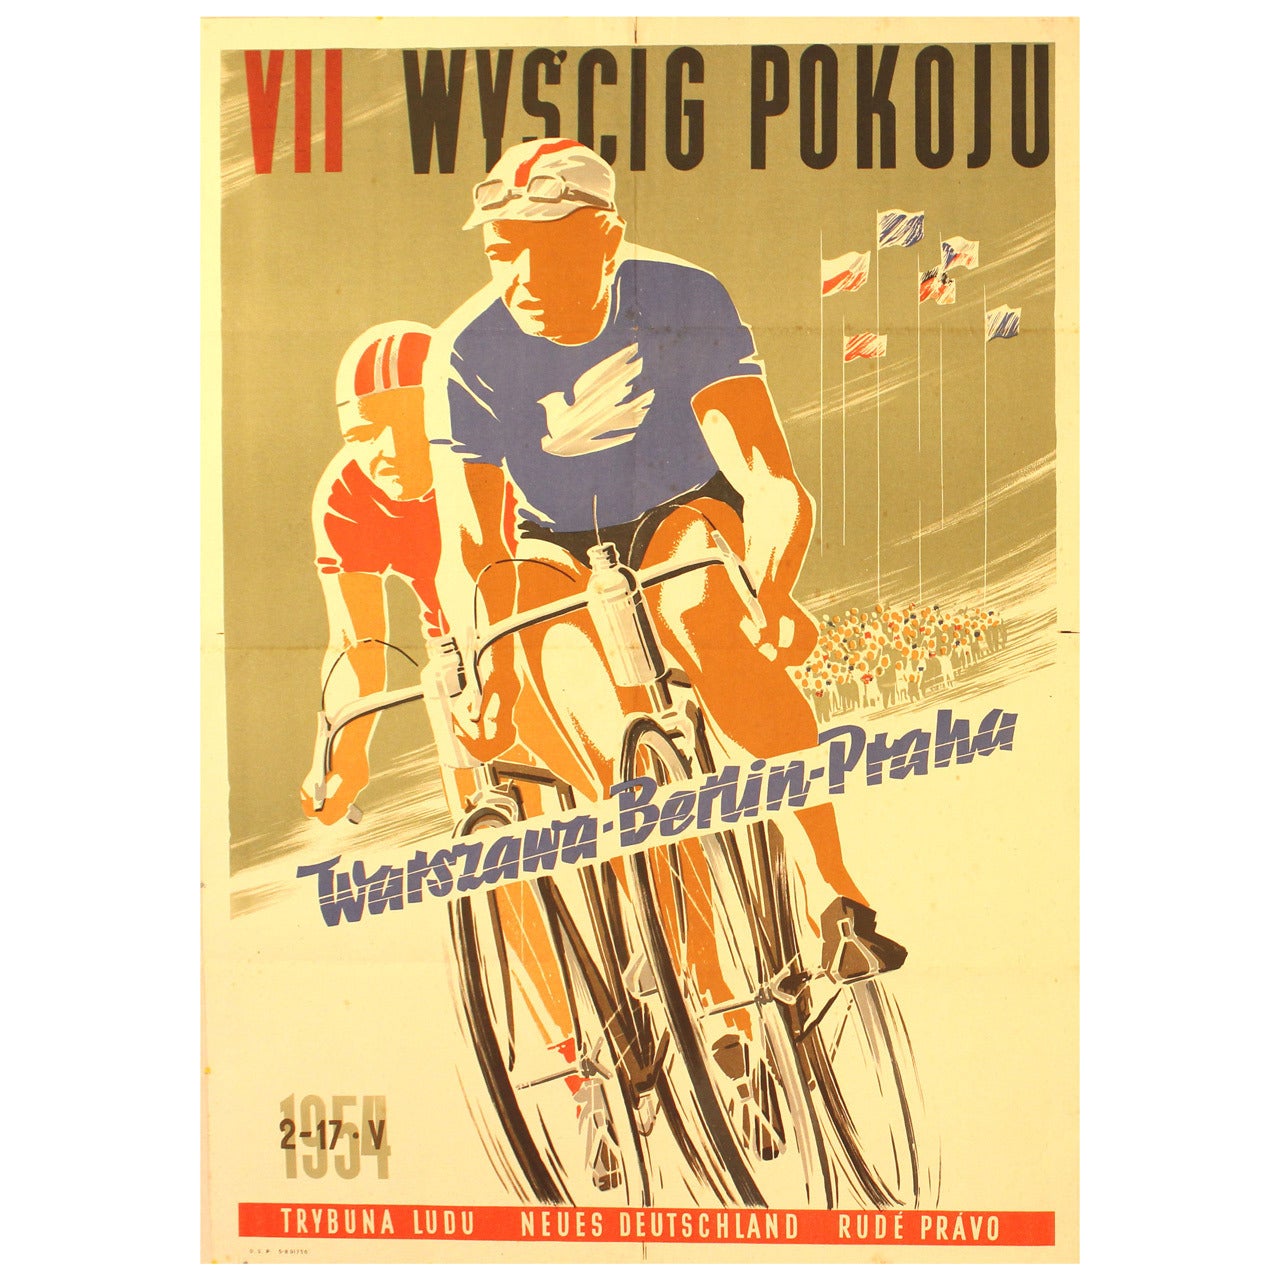 Original Vintage Sport Poster for the VII Peace Cycling Competition